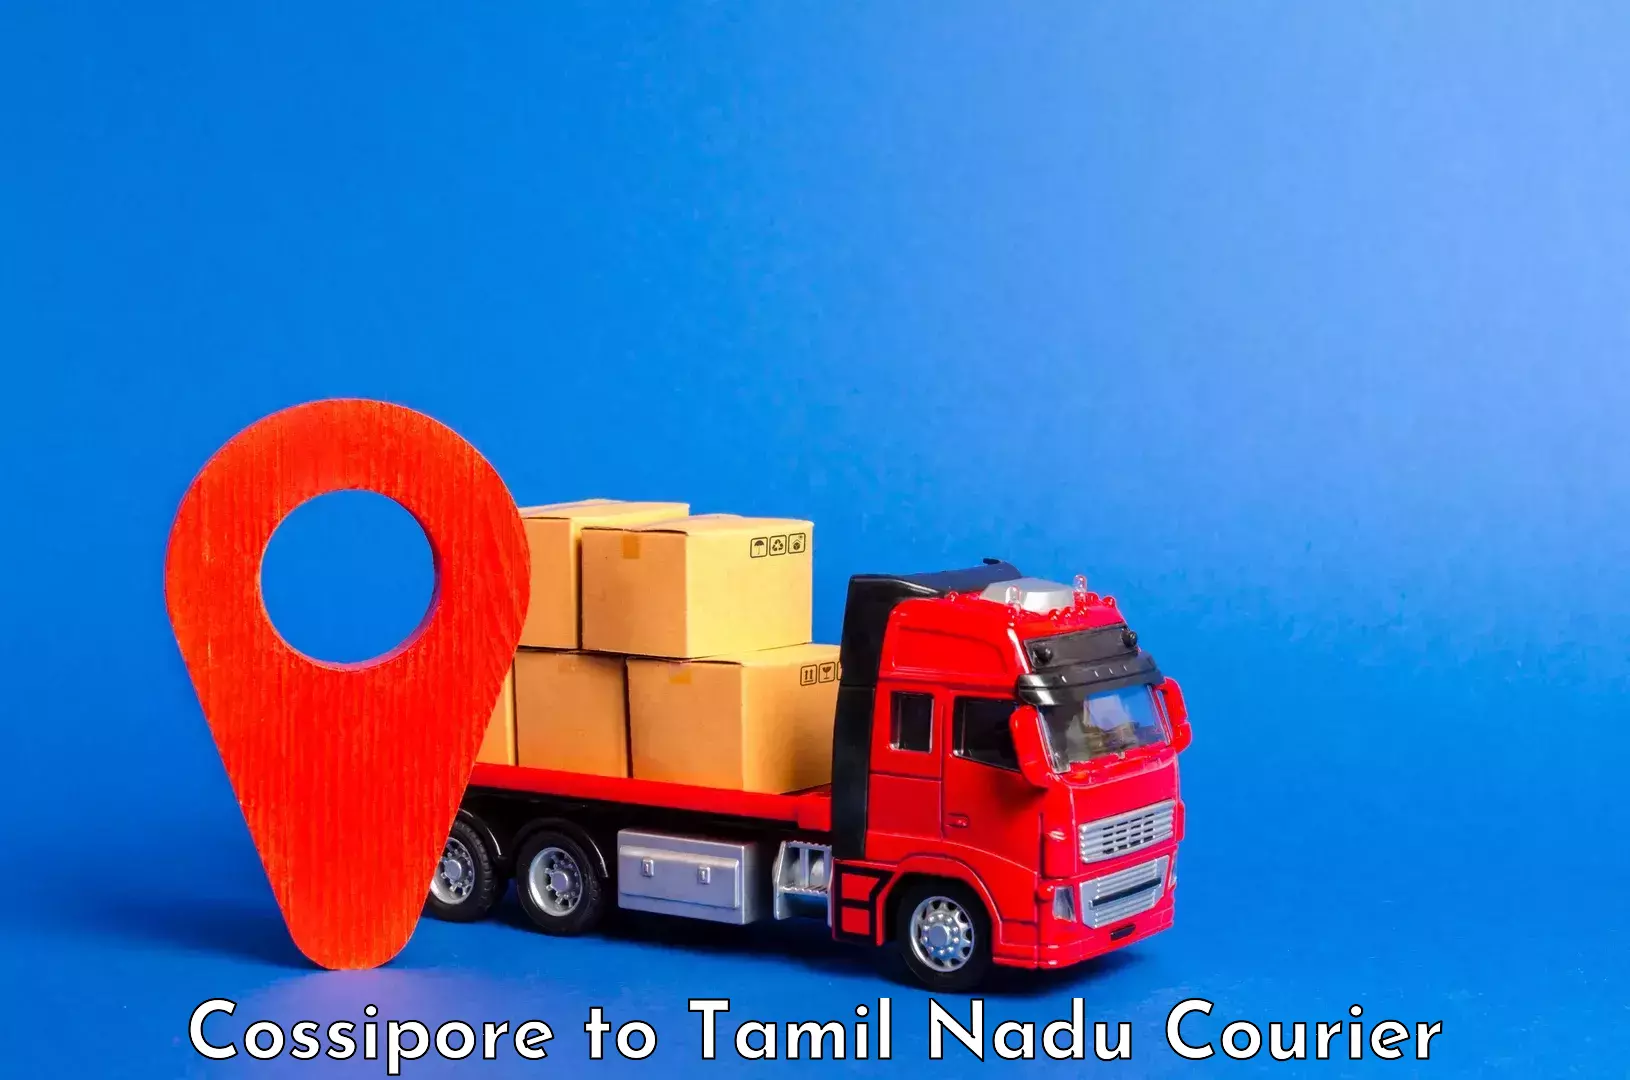 Luggage transport consulting Cossipore to Anna University Chennai